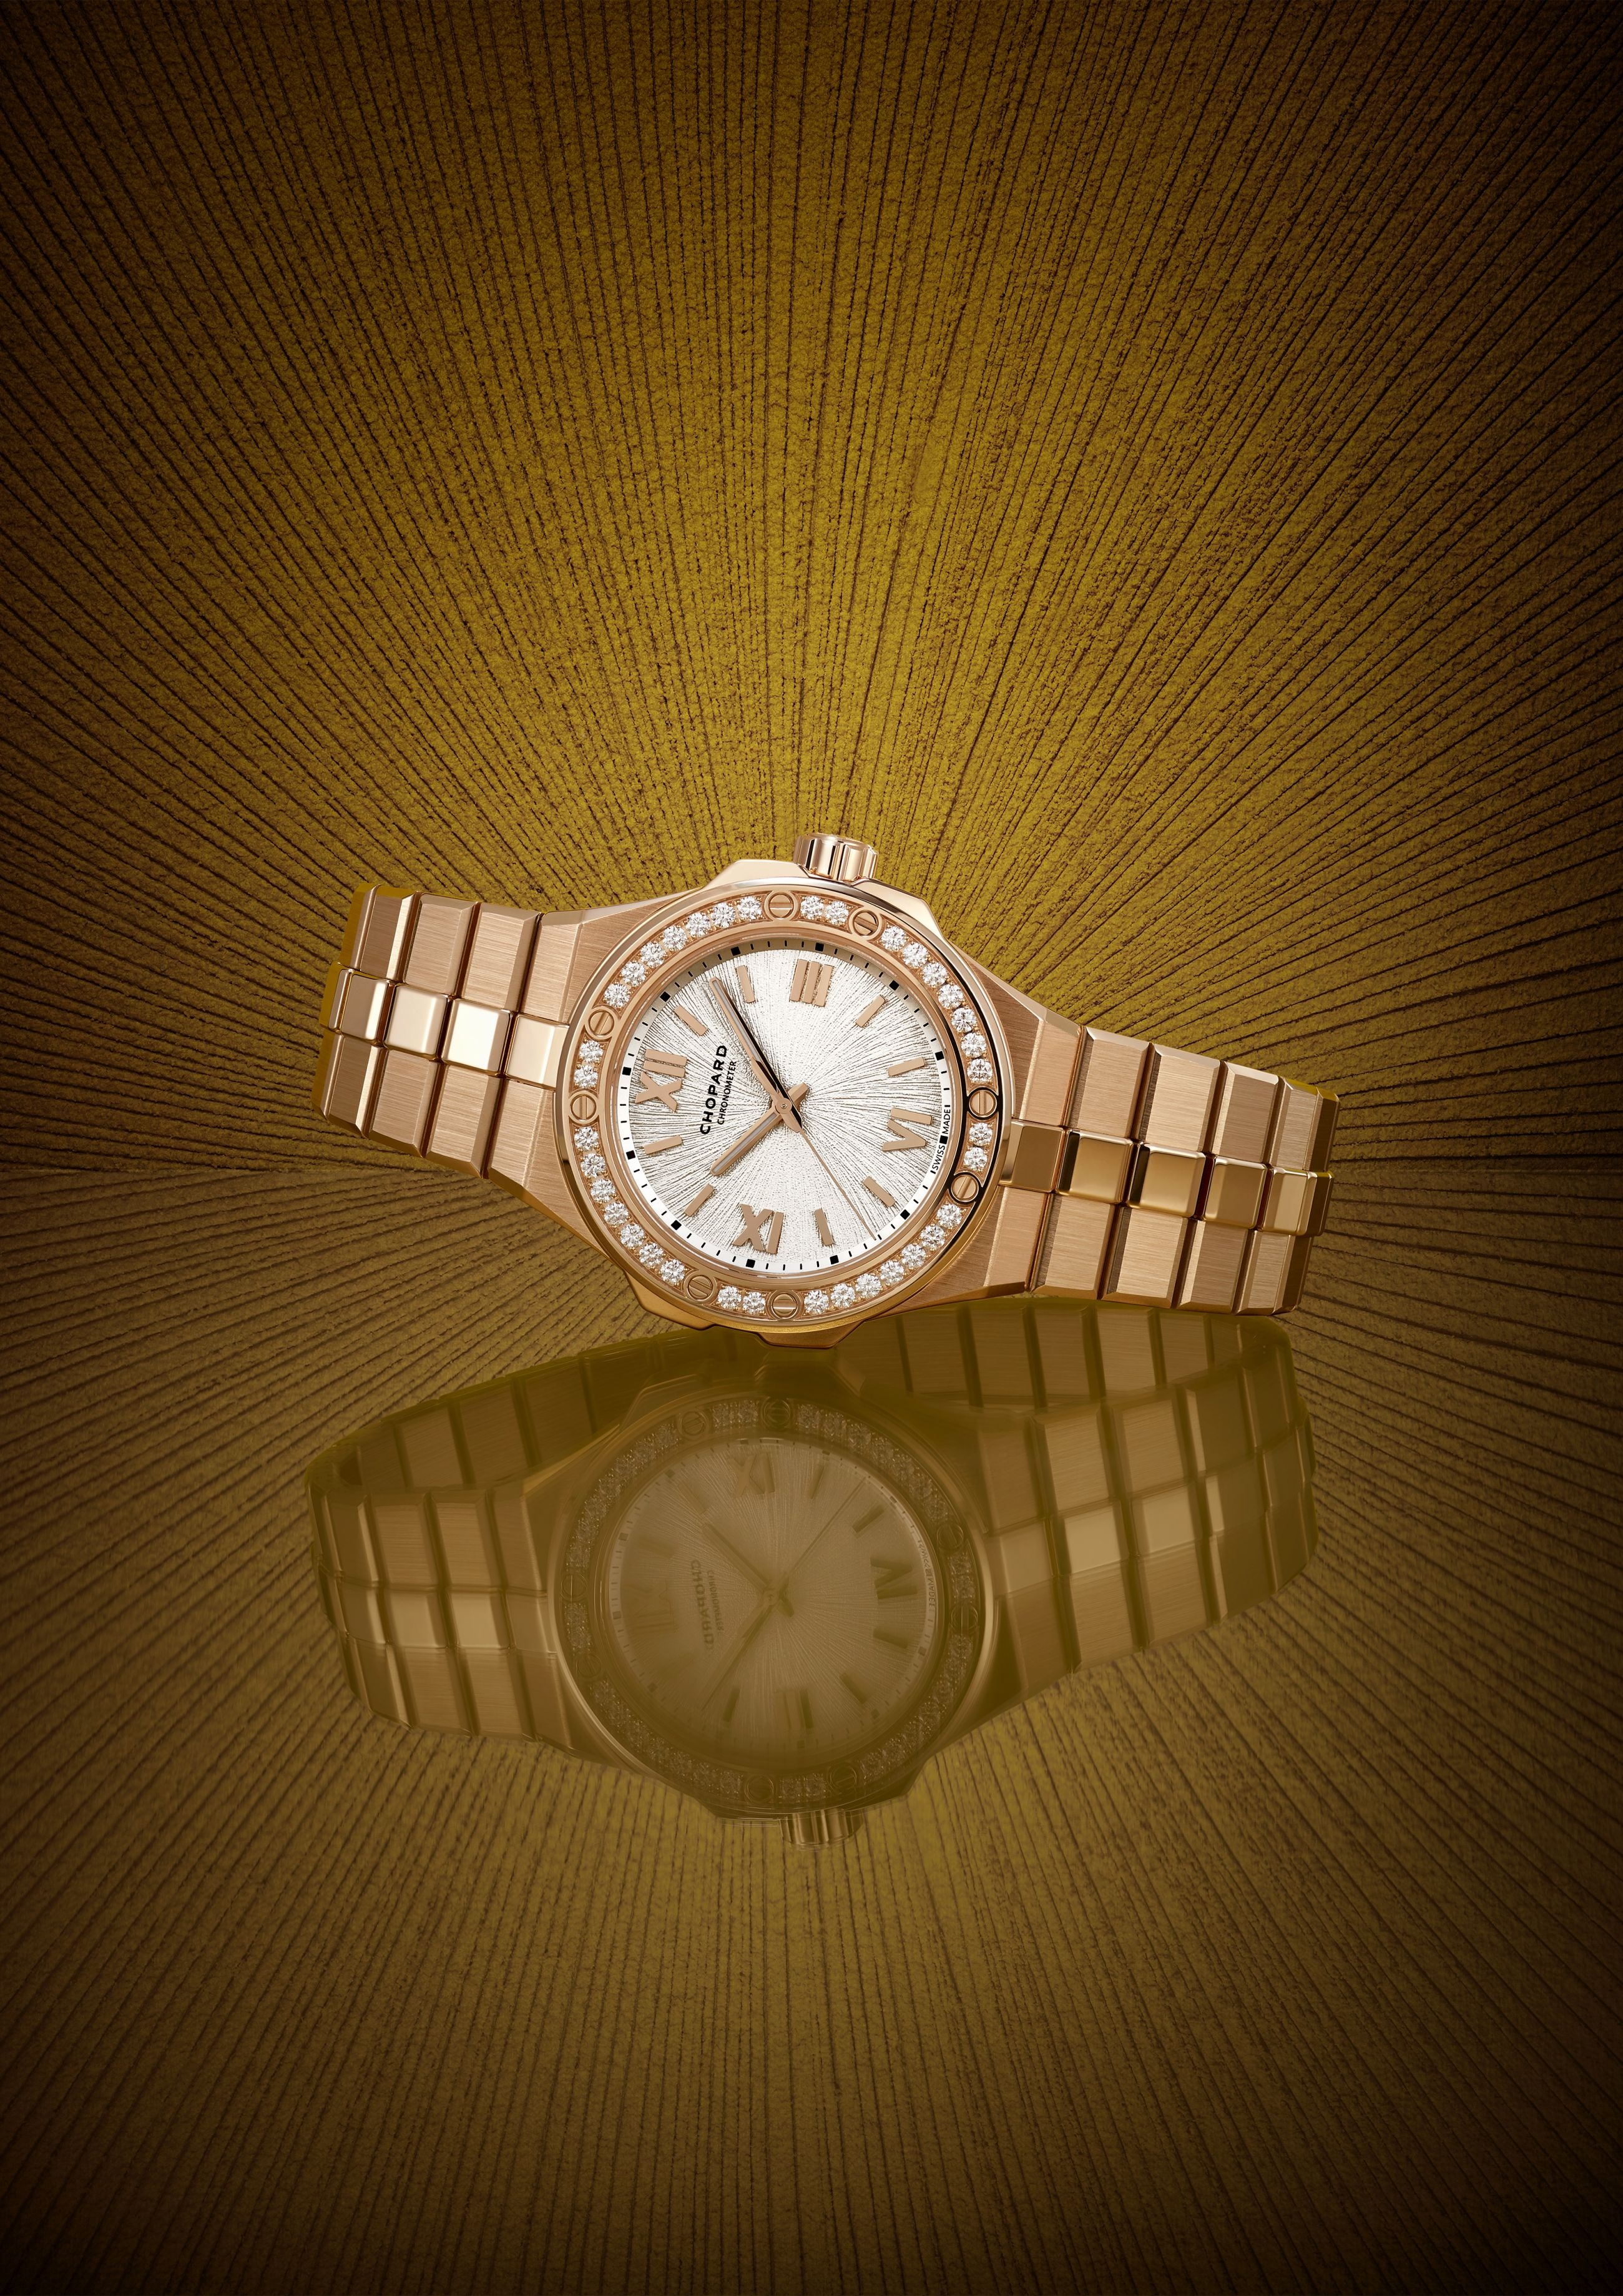 Alpine Eagle Large Automatic 41mm Lucent Steel and 18-Karat Rose Gold  Watch, Ref. No. 298600-6001